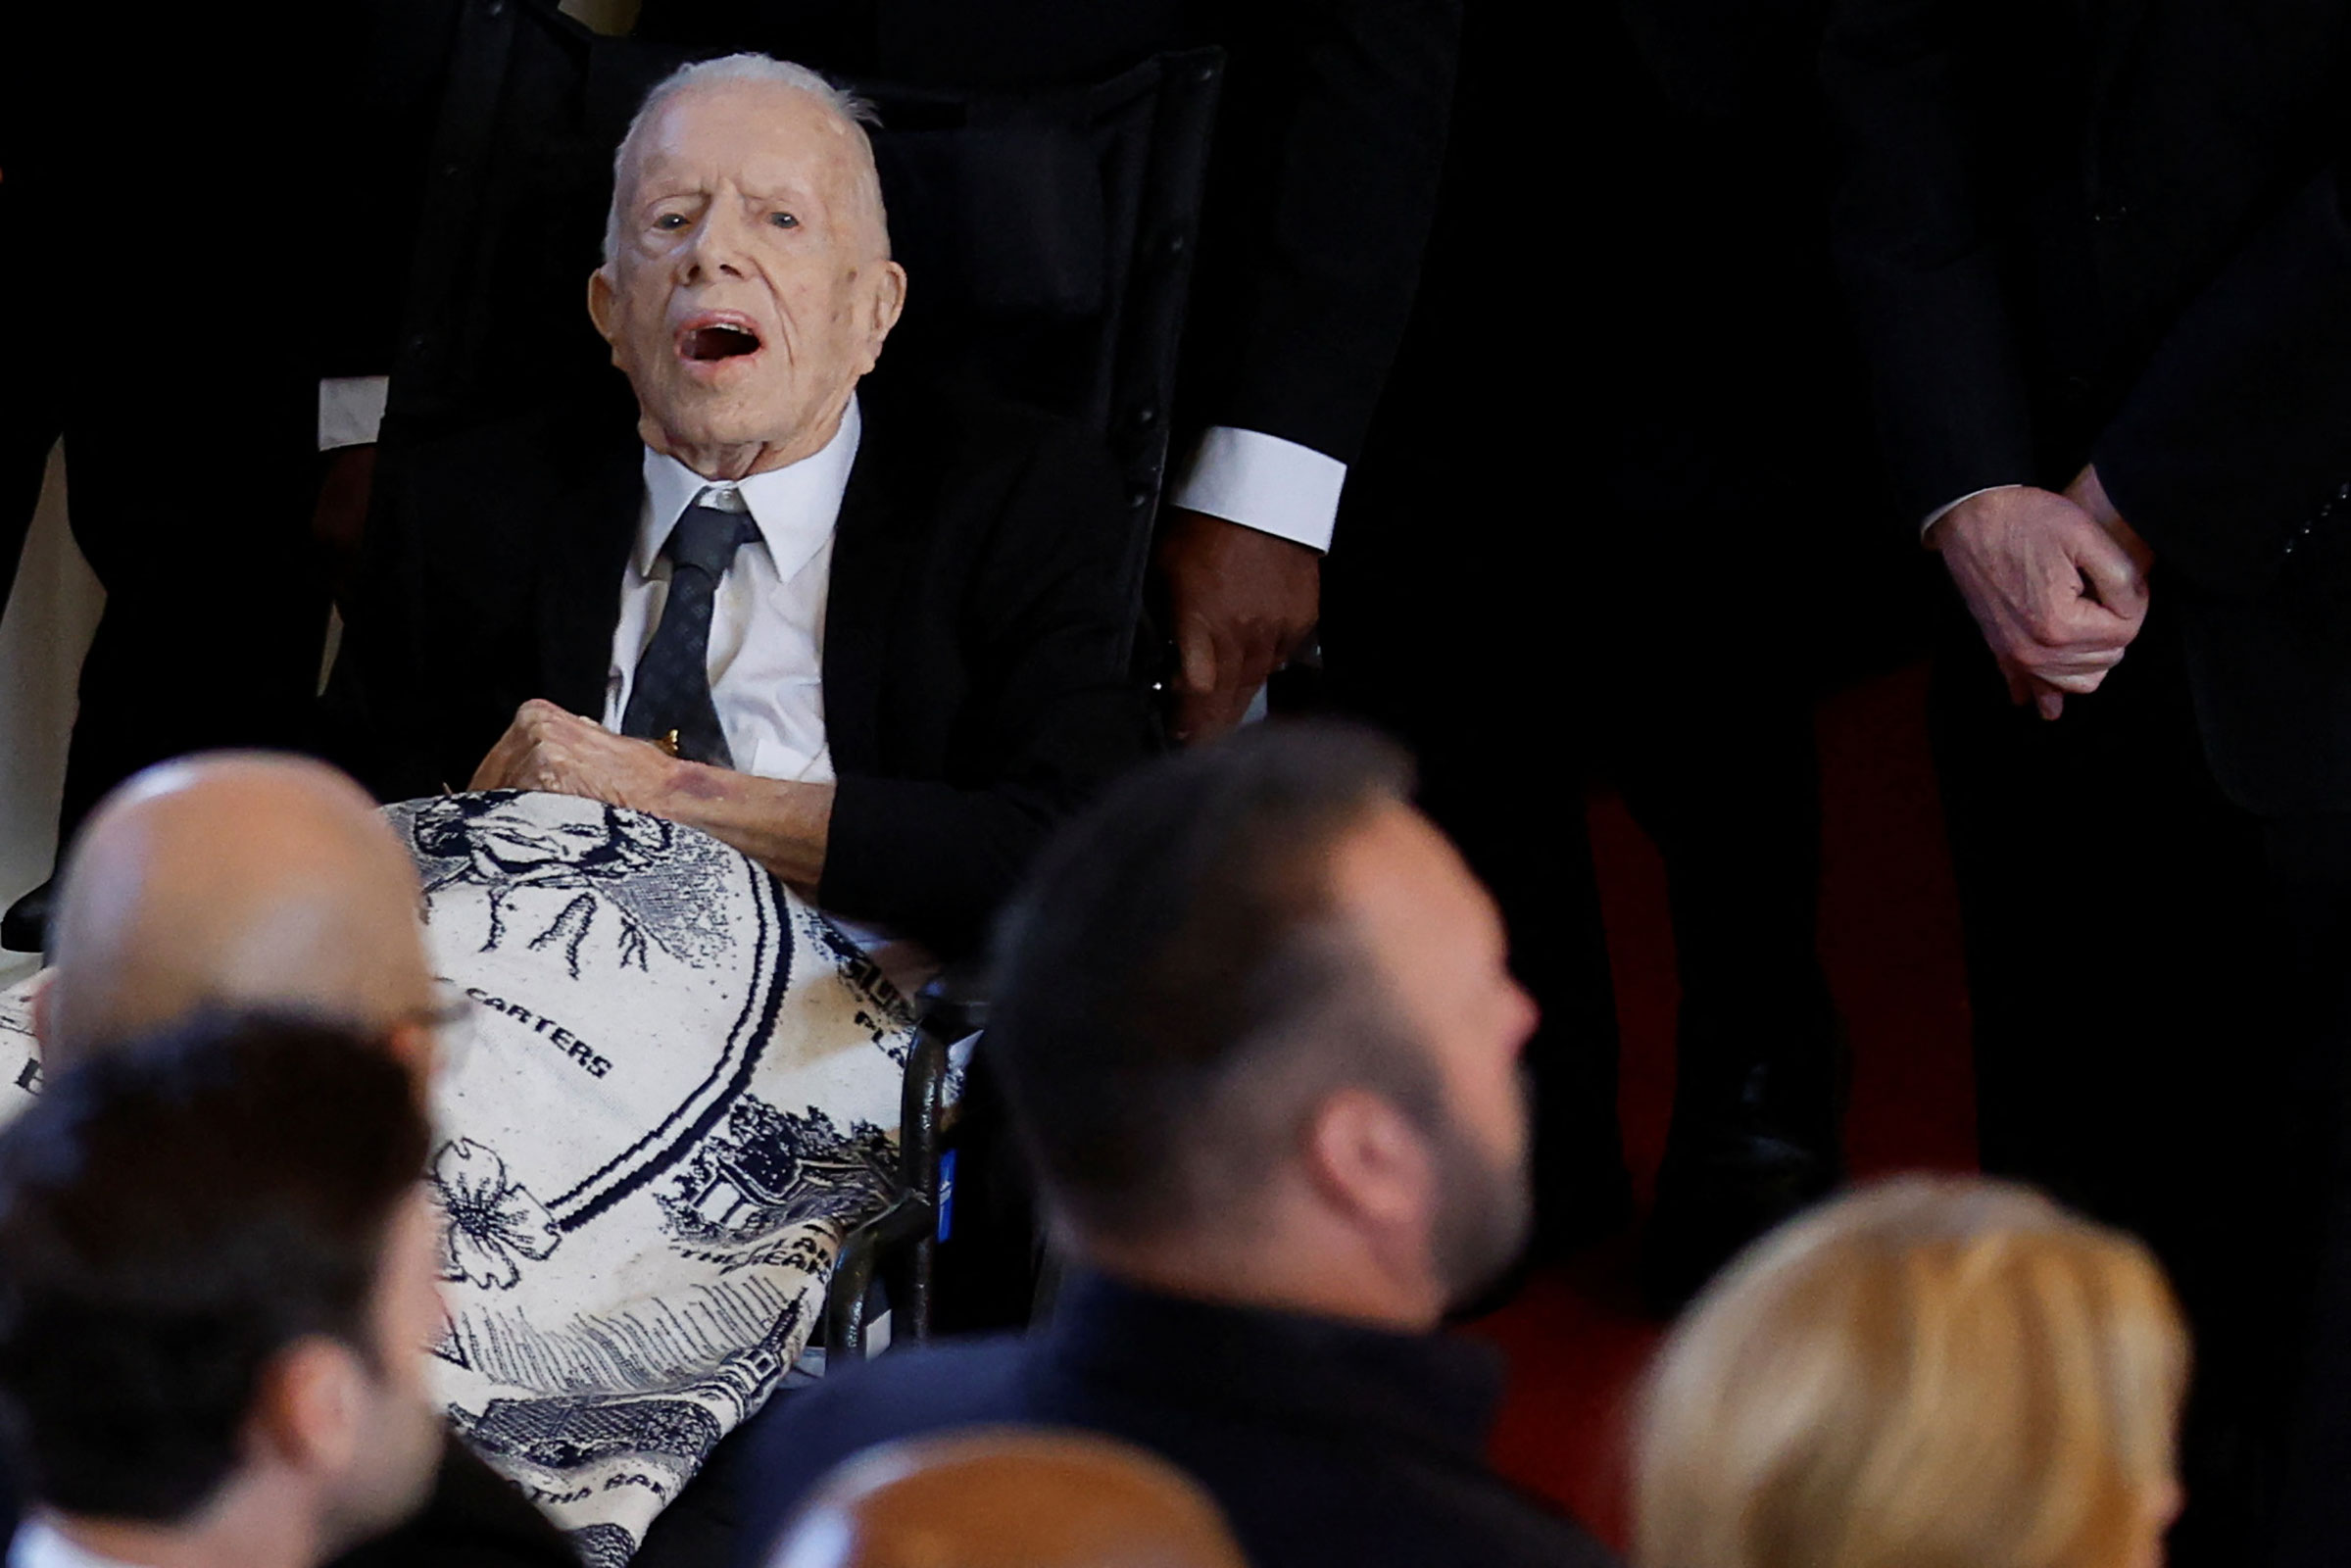 Former President Jimmy Carter attends a tribute service for his wife former first lady Rosalynn Carter, at Glenn Memorial Church in Atlanta, on Tuesday.